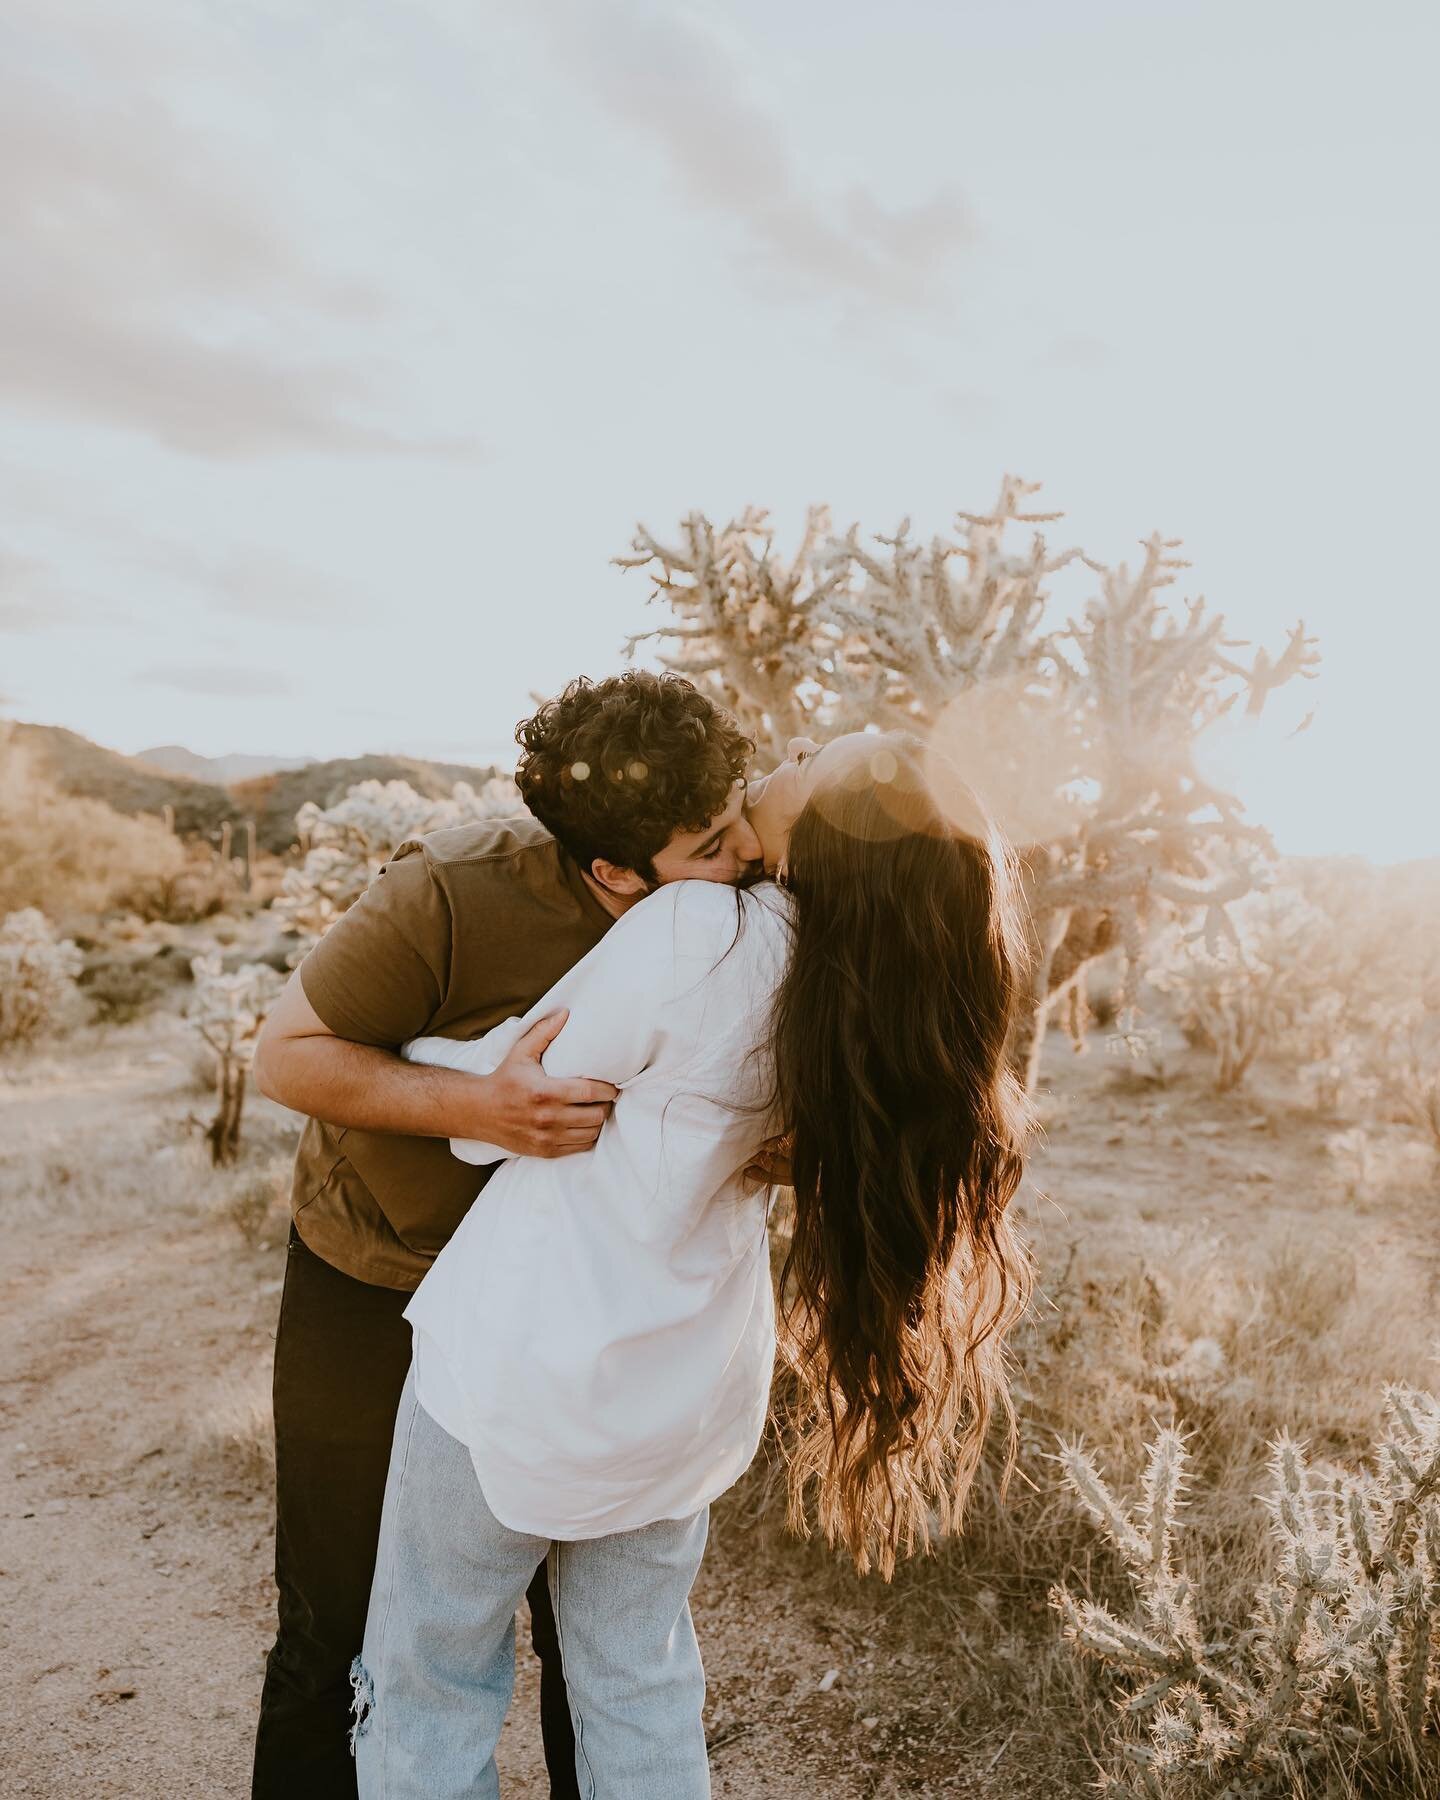 I&rsquo;m in love with sun flares and these pics!🤩

&bull;
&bull;
&bull;
#couplesphotography #couplesphotoshoot #couplesphotographer #couplegoals #arizonaphotographer #azphotographer #mesaphotographer #phoenixphotographer #gilbertphotographer #scott